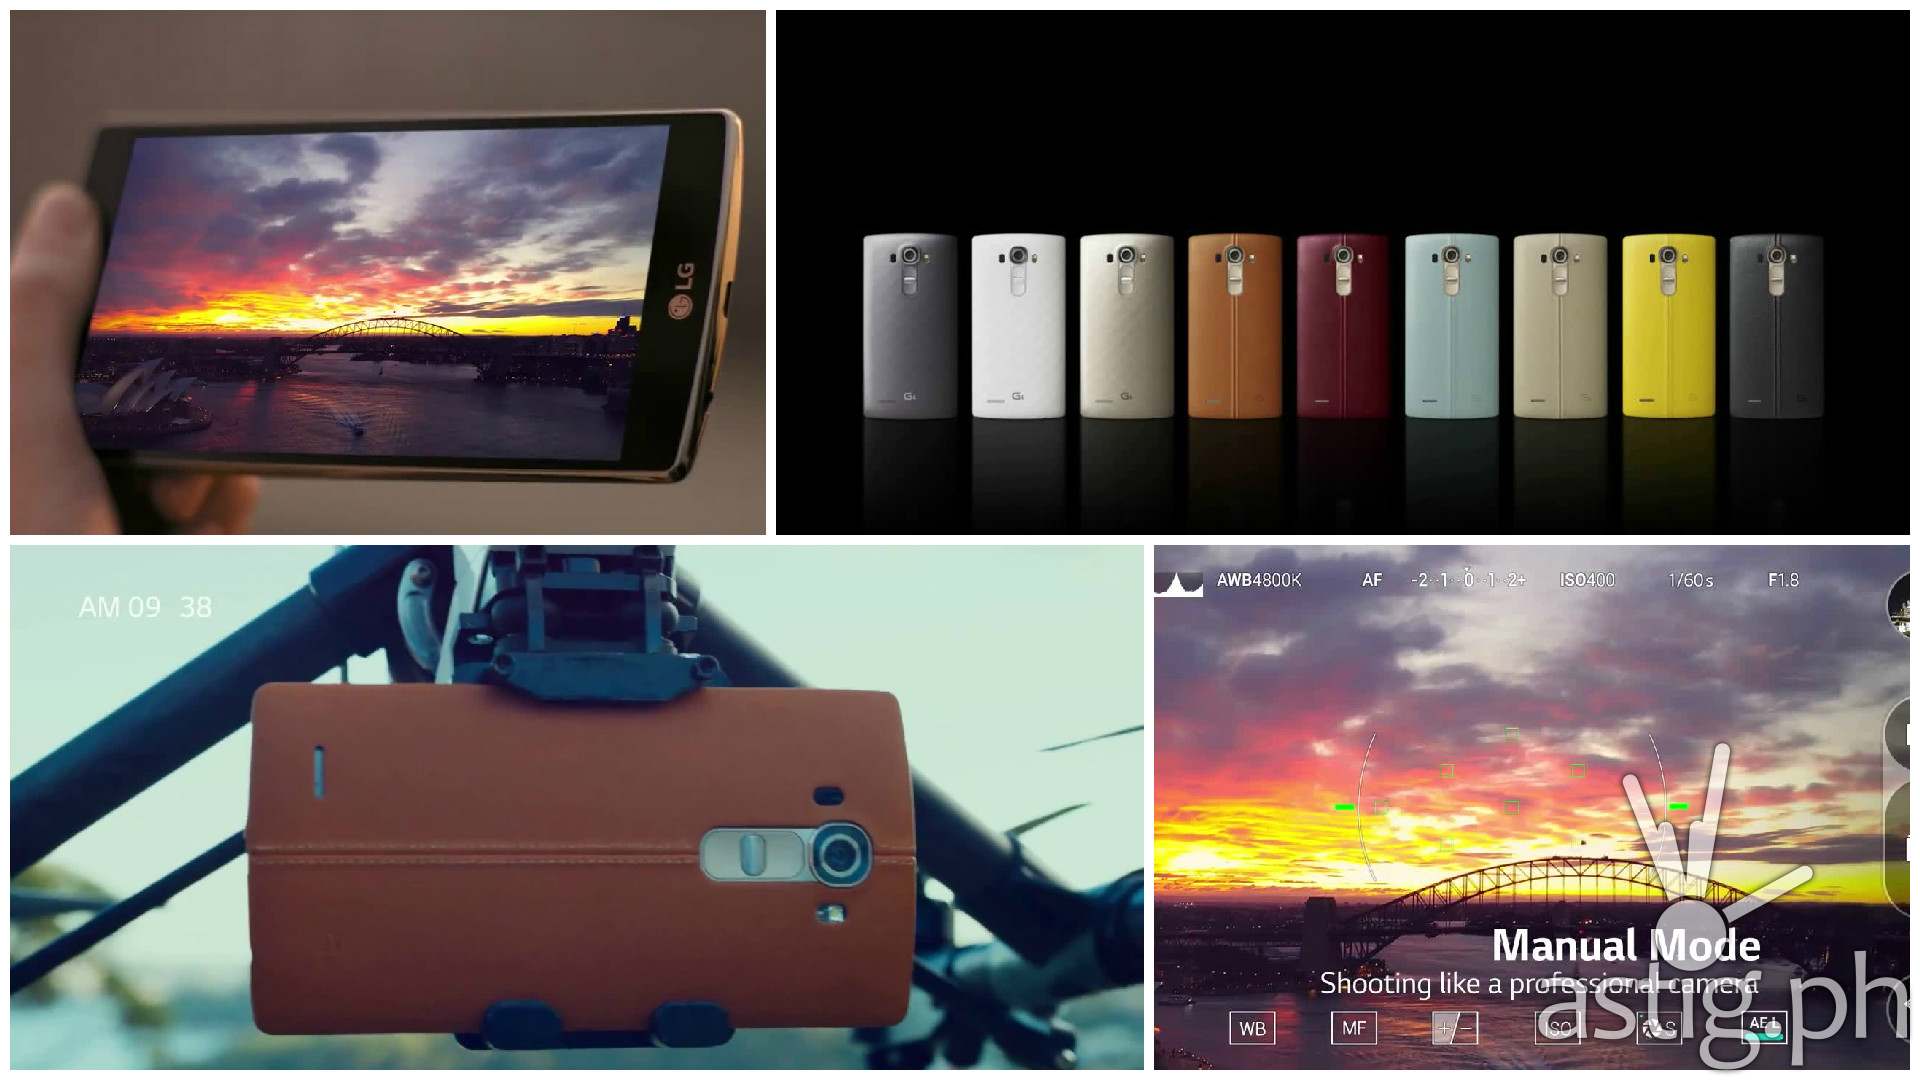 LG G4 features camera video